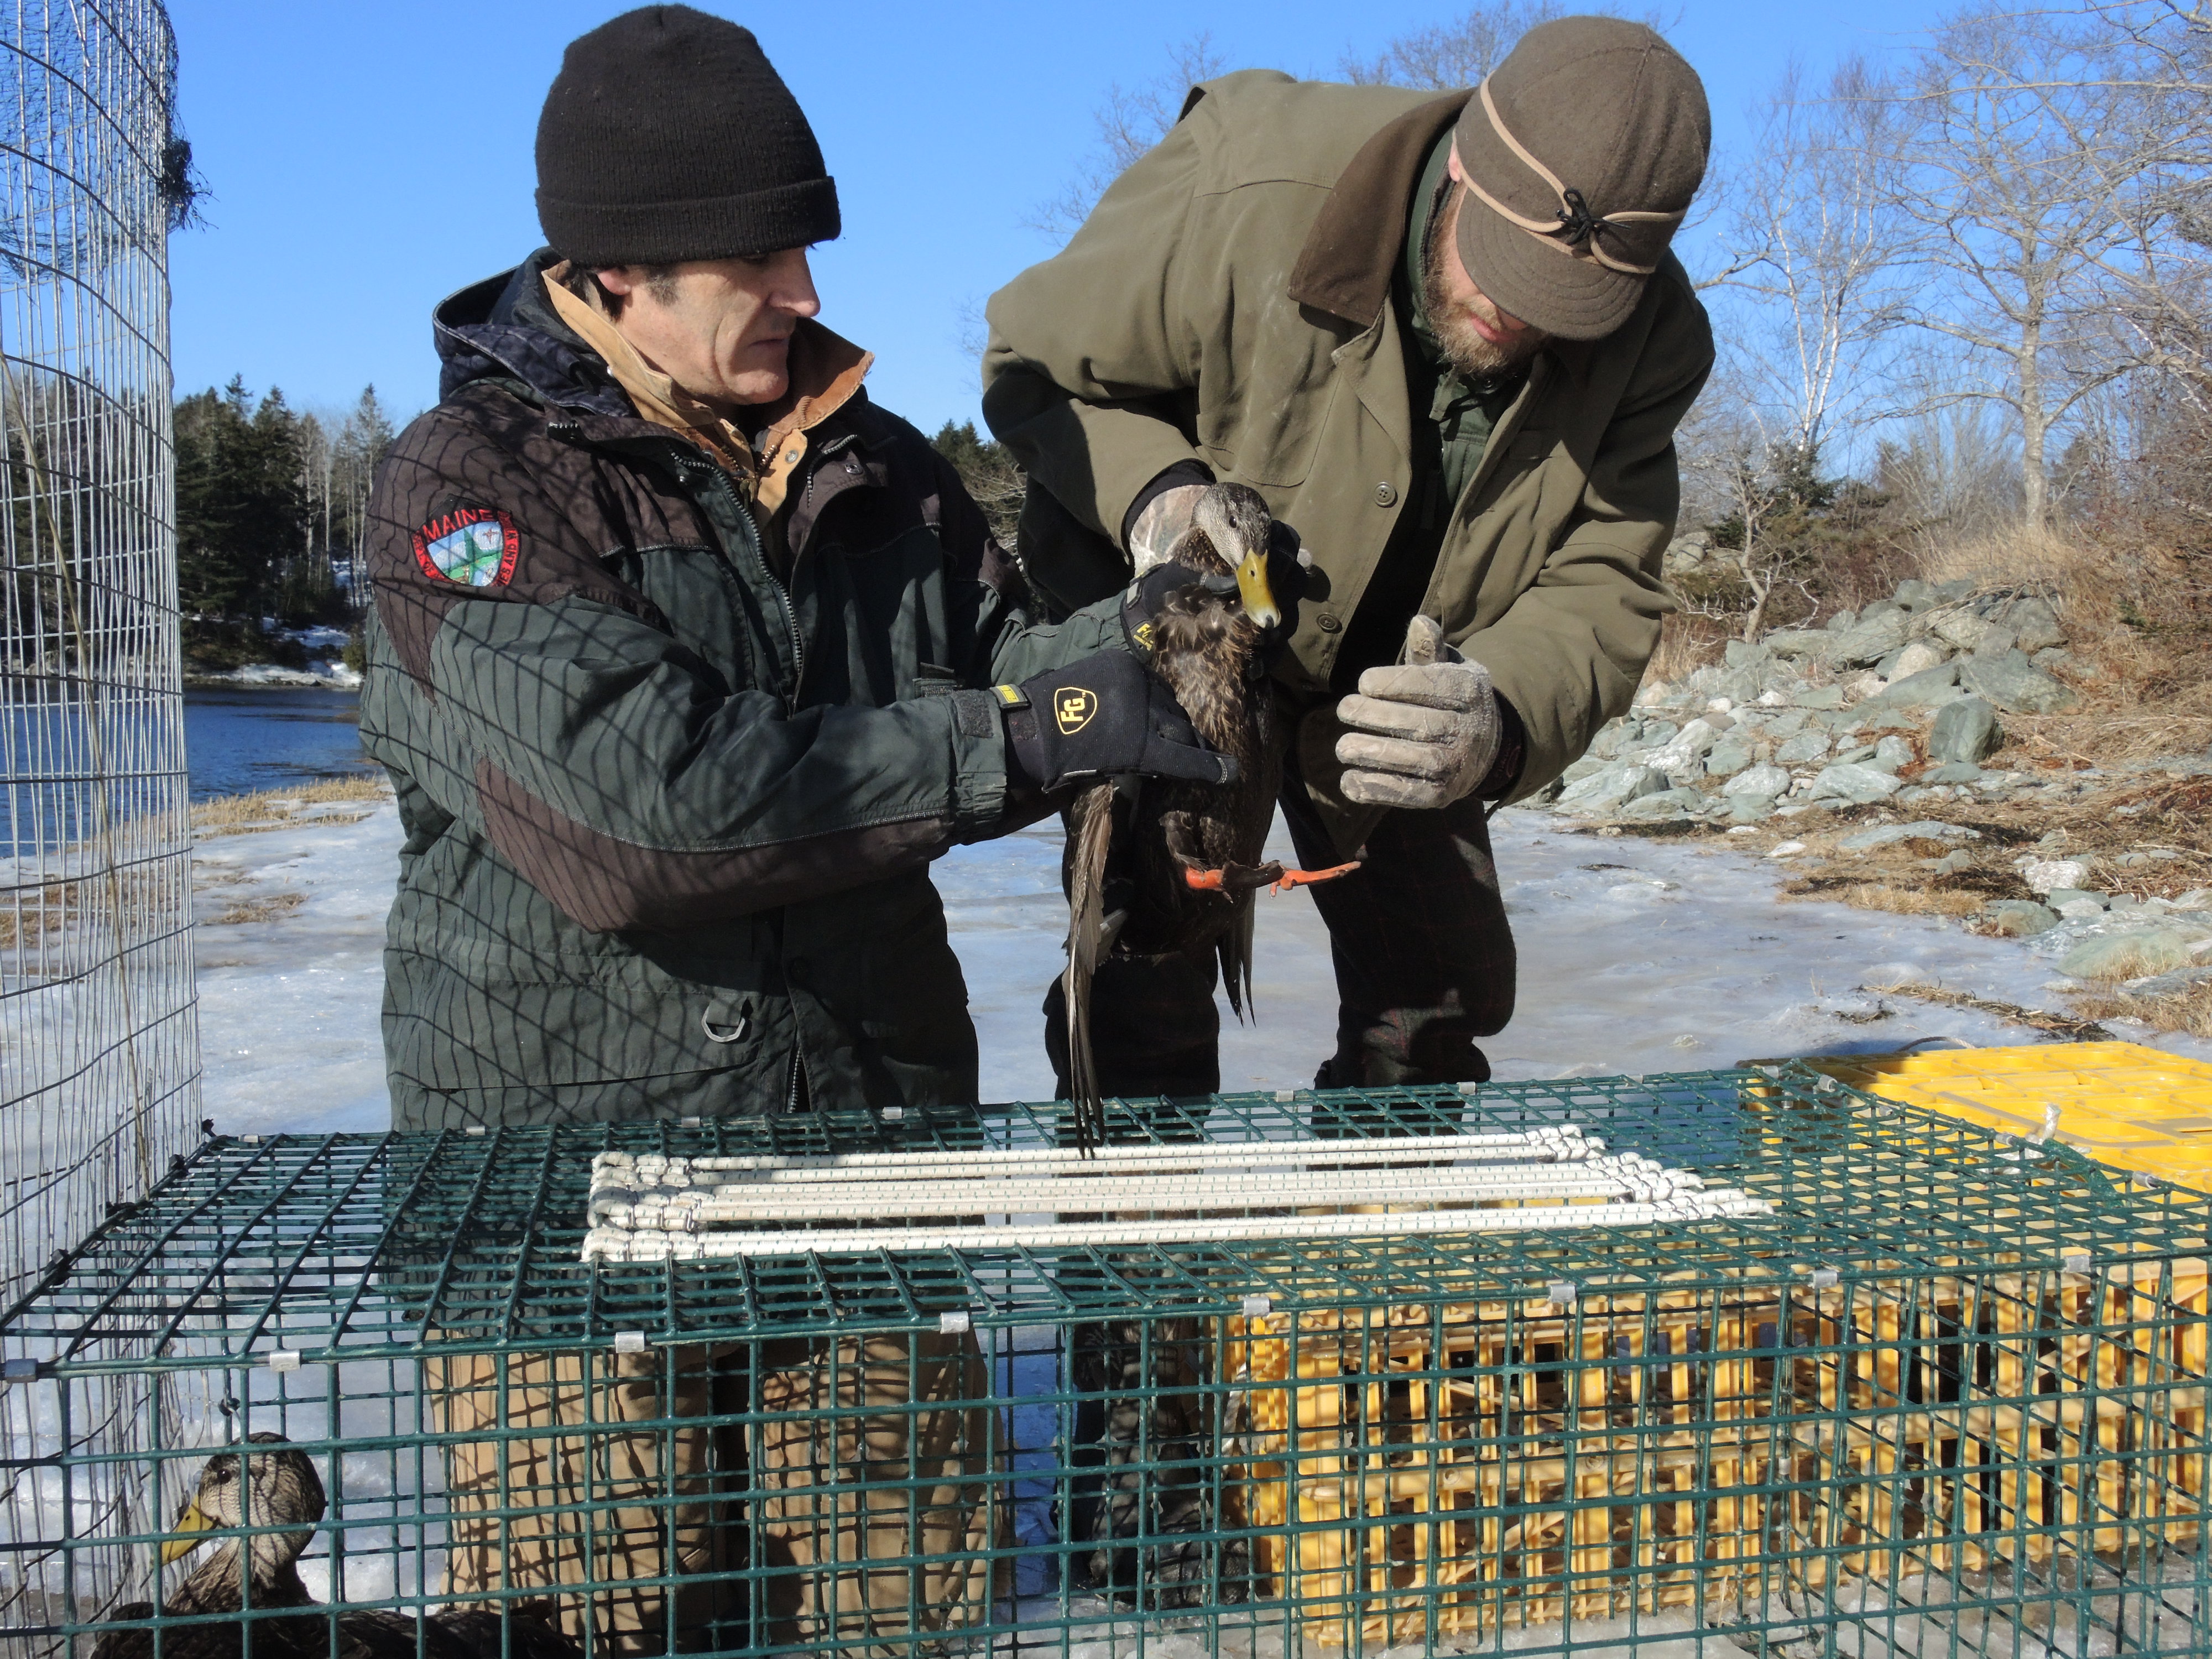 Once inside the fencing, the ducks are led into a smaller crate, and they are then removed in order to place a band on their leg.